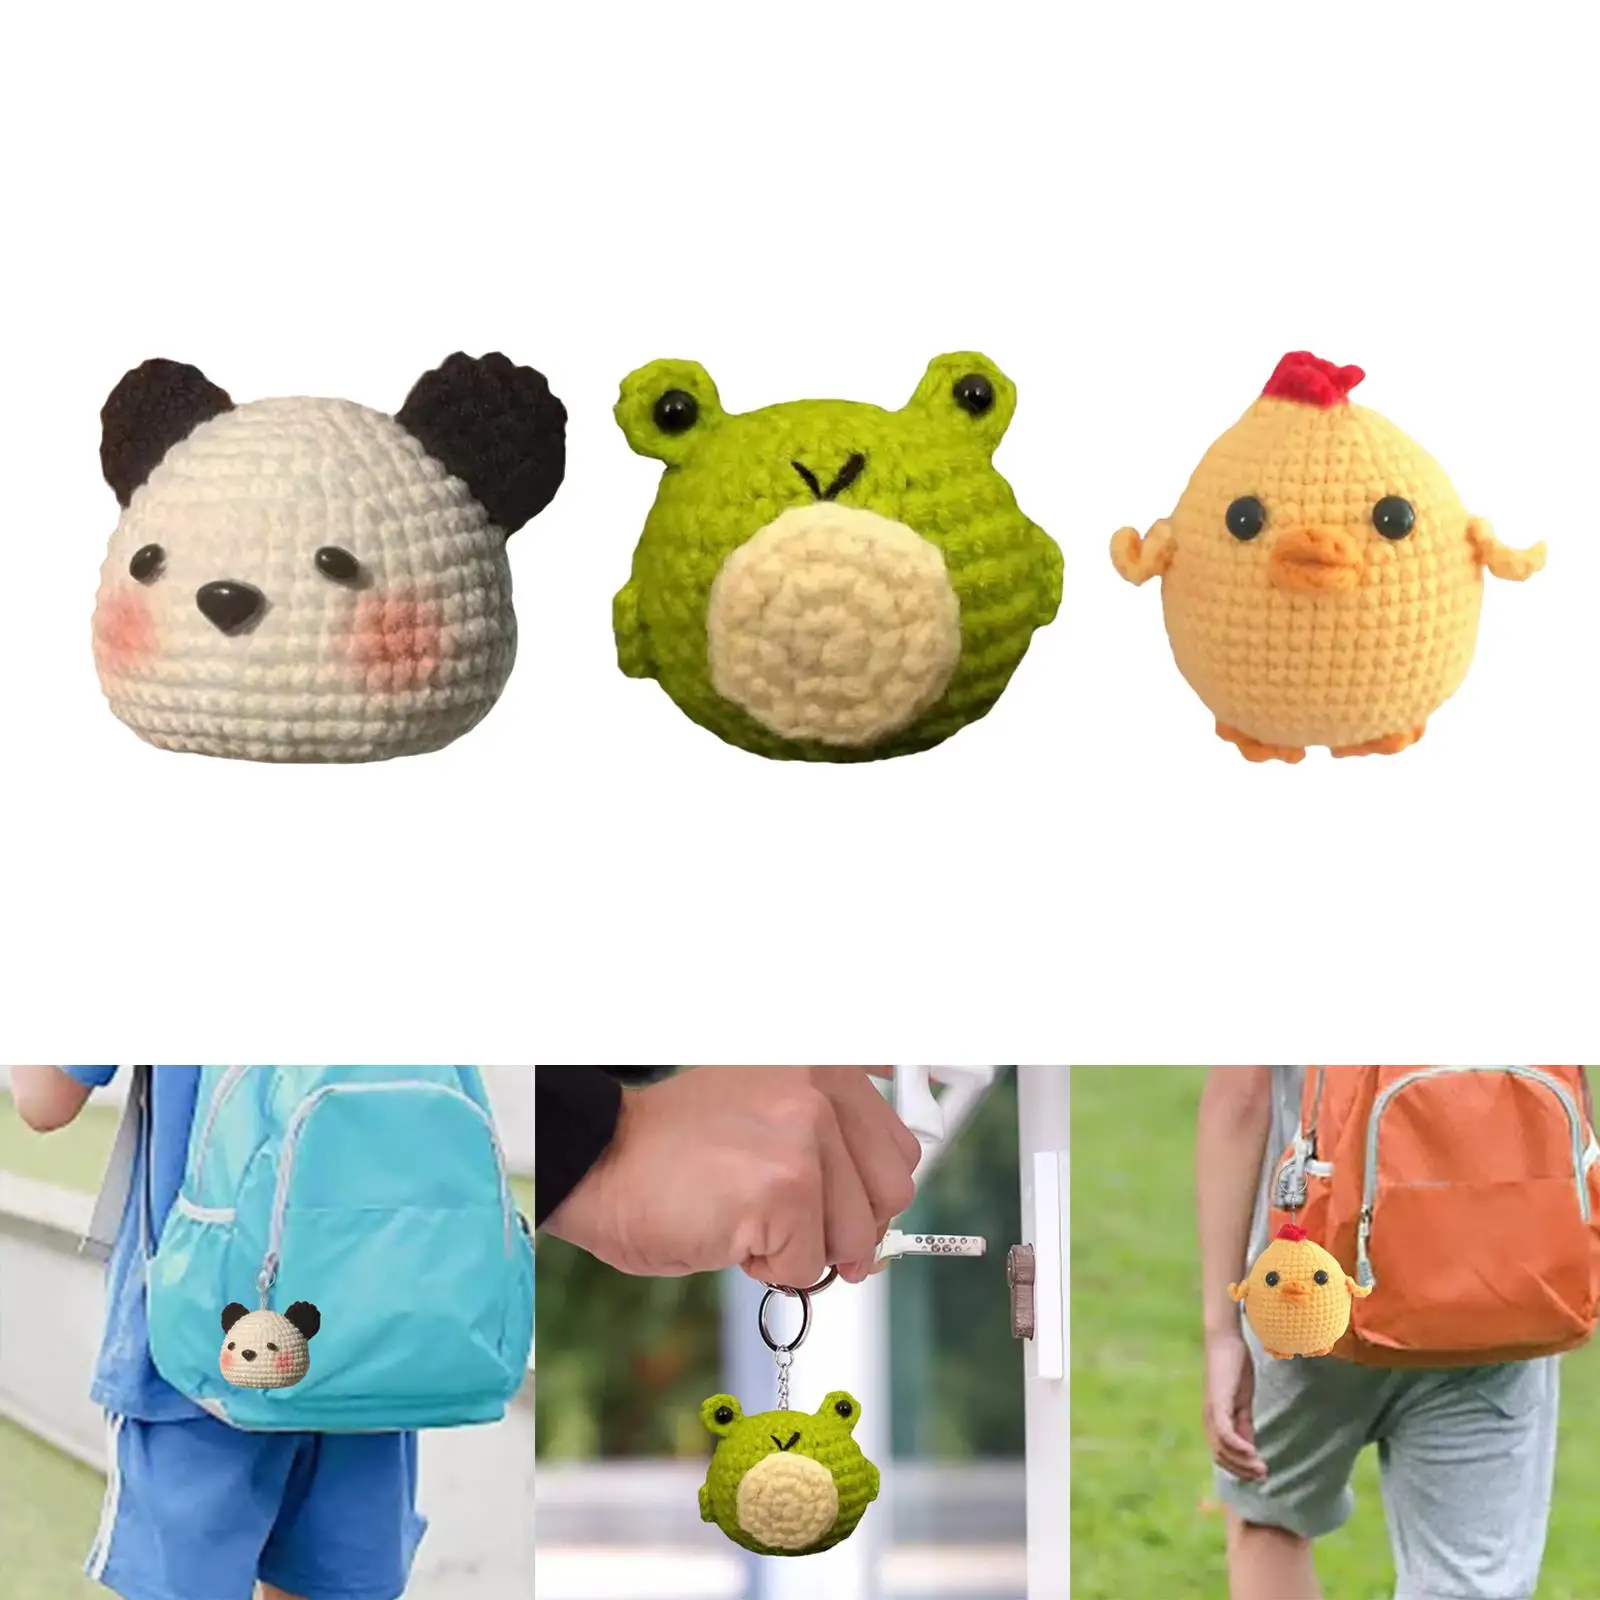 DIY Animal Crochet Kit Sewing Craft Stuffing Skill Classic Starter Hand Knitting Toy Easy to Use Crochet Kit for Perfect Gift